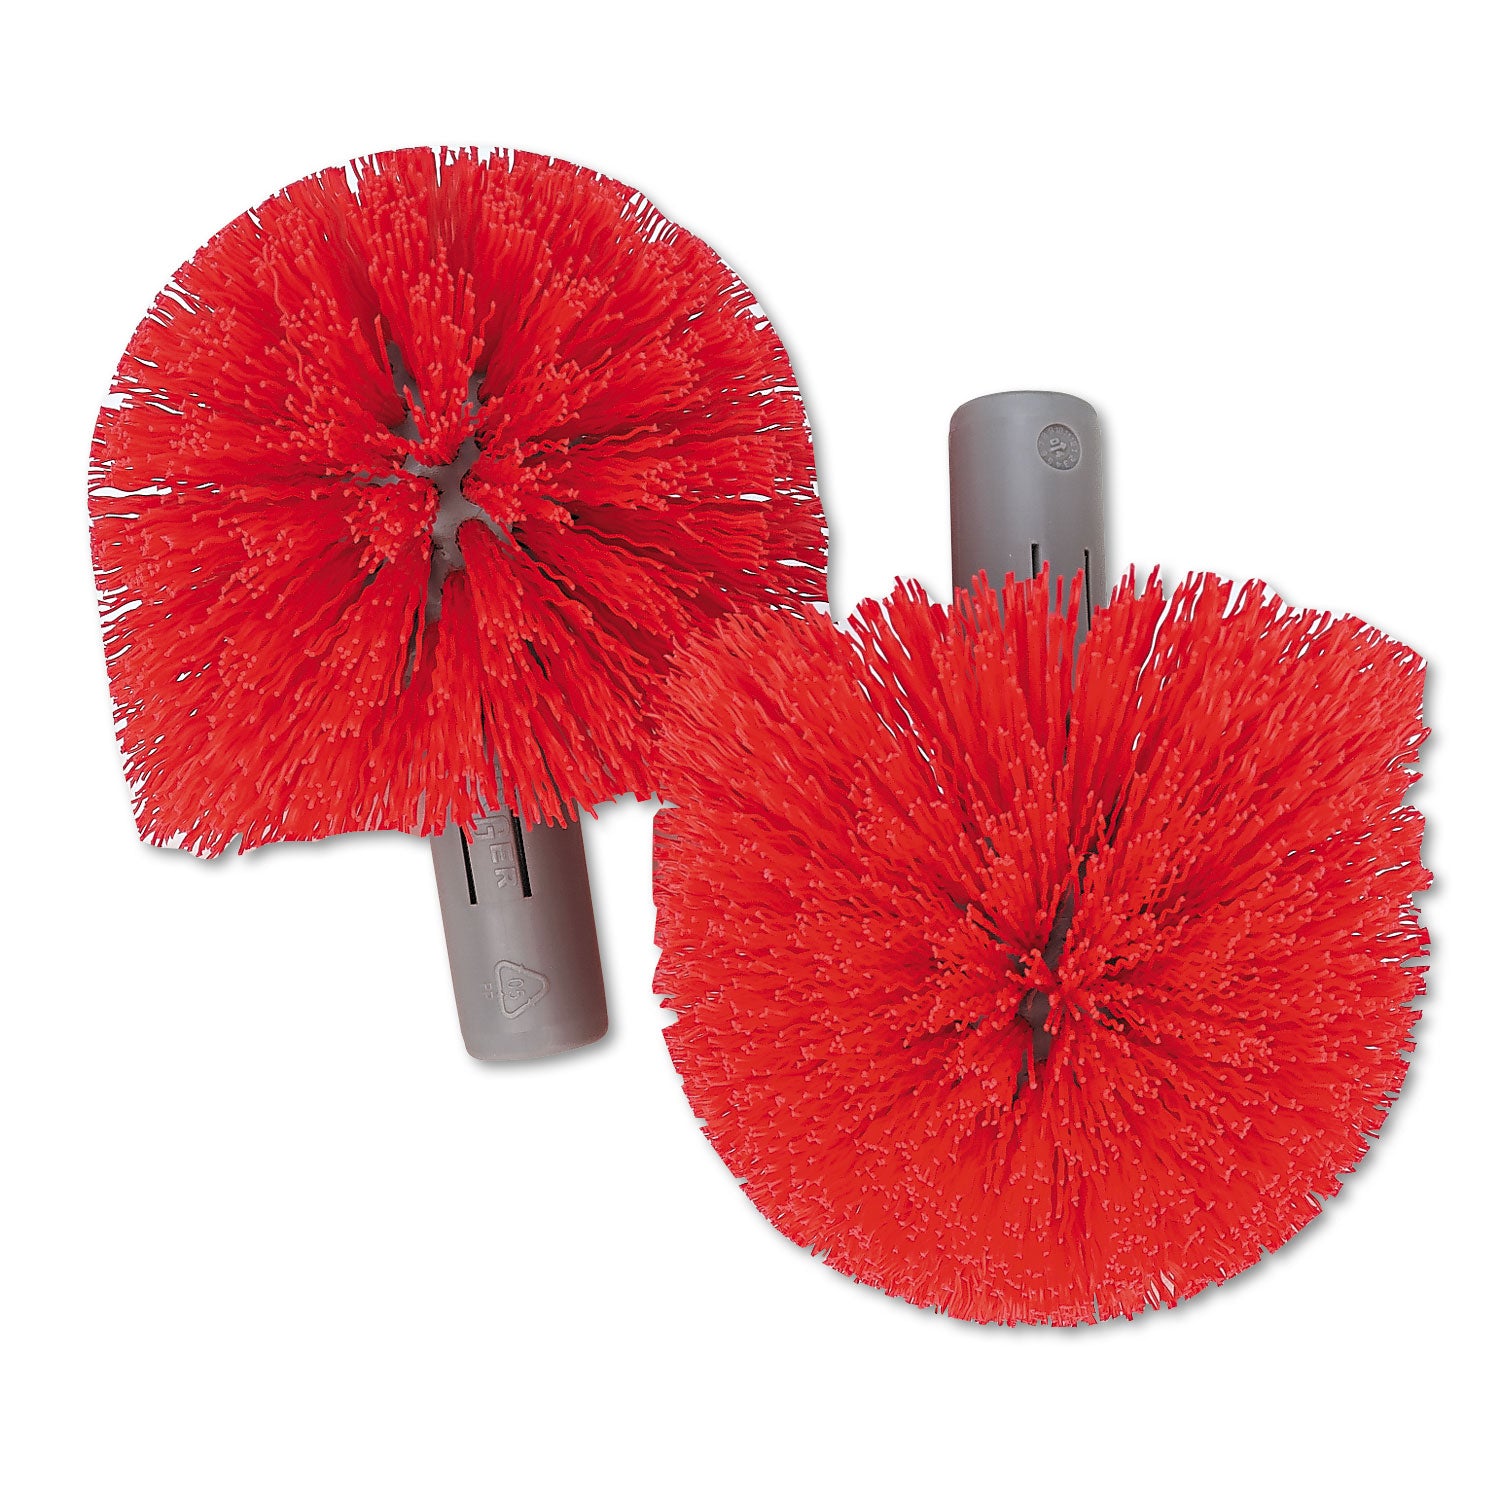 Replacement Heads for Ergo Toilet-Bowl-Brush System, Red, 2/Pack - 